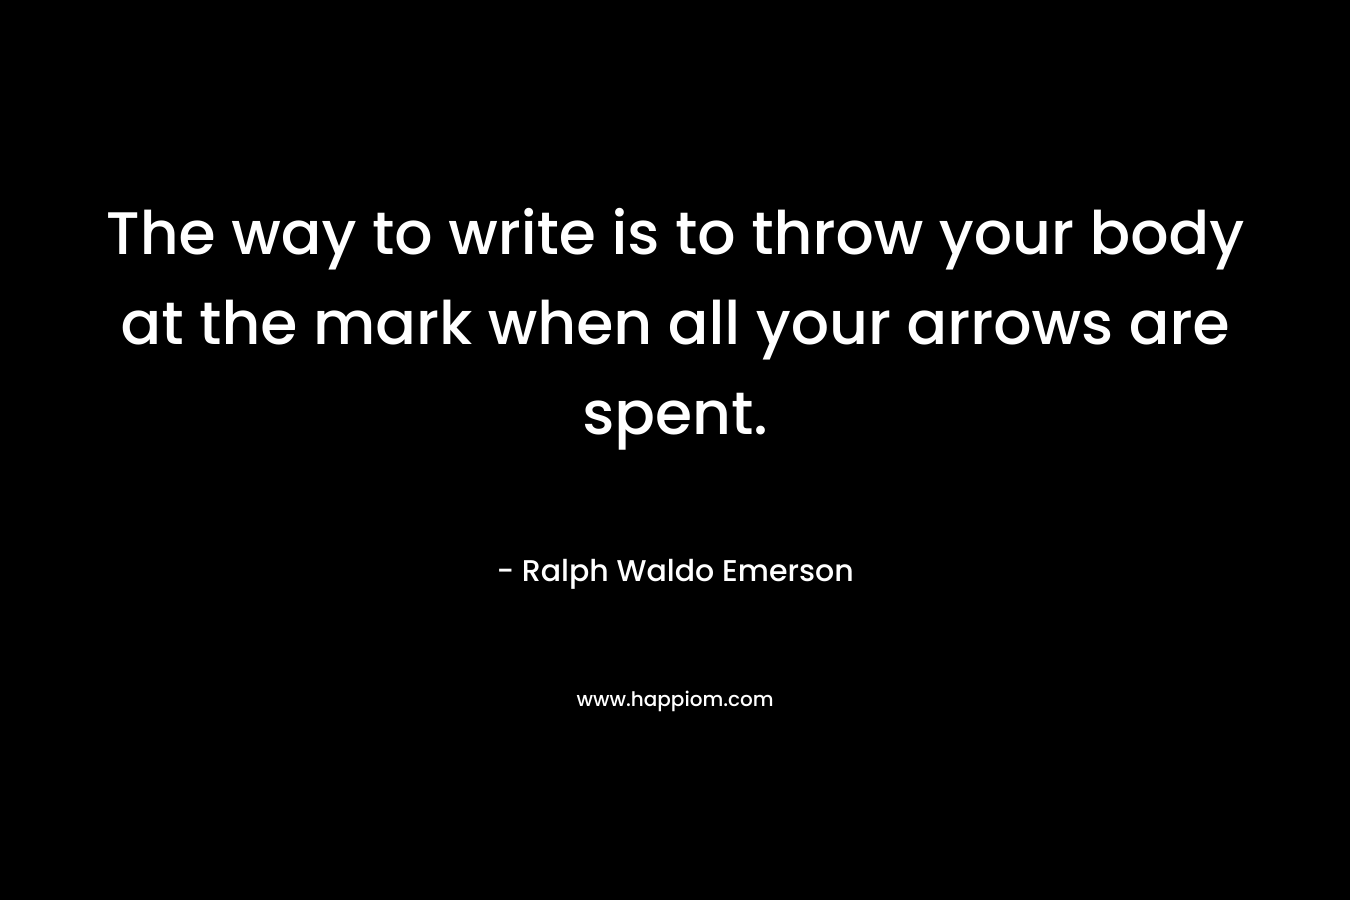 The way to write is to throw your body at the mark when all your arrows are spent.